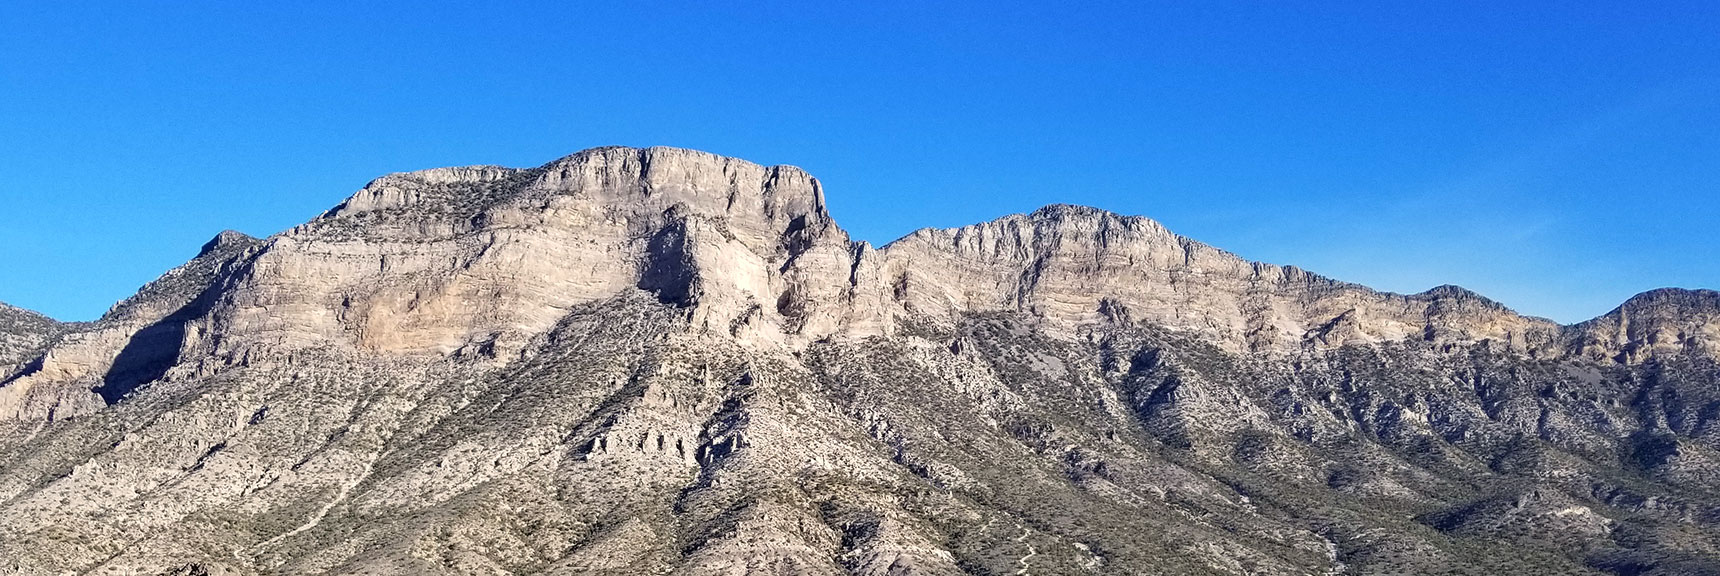 La Madre Mountain Viewed from Calico Basin, Nevada